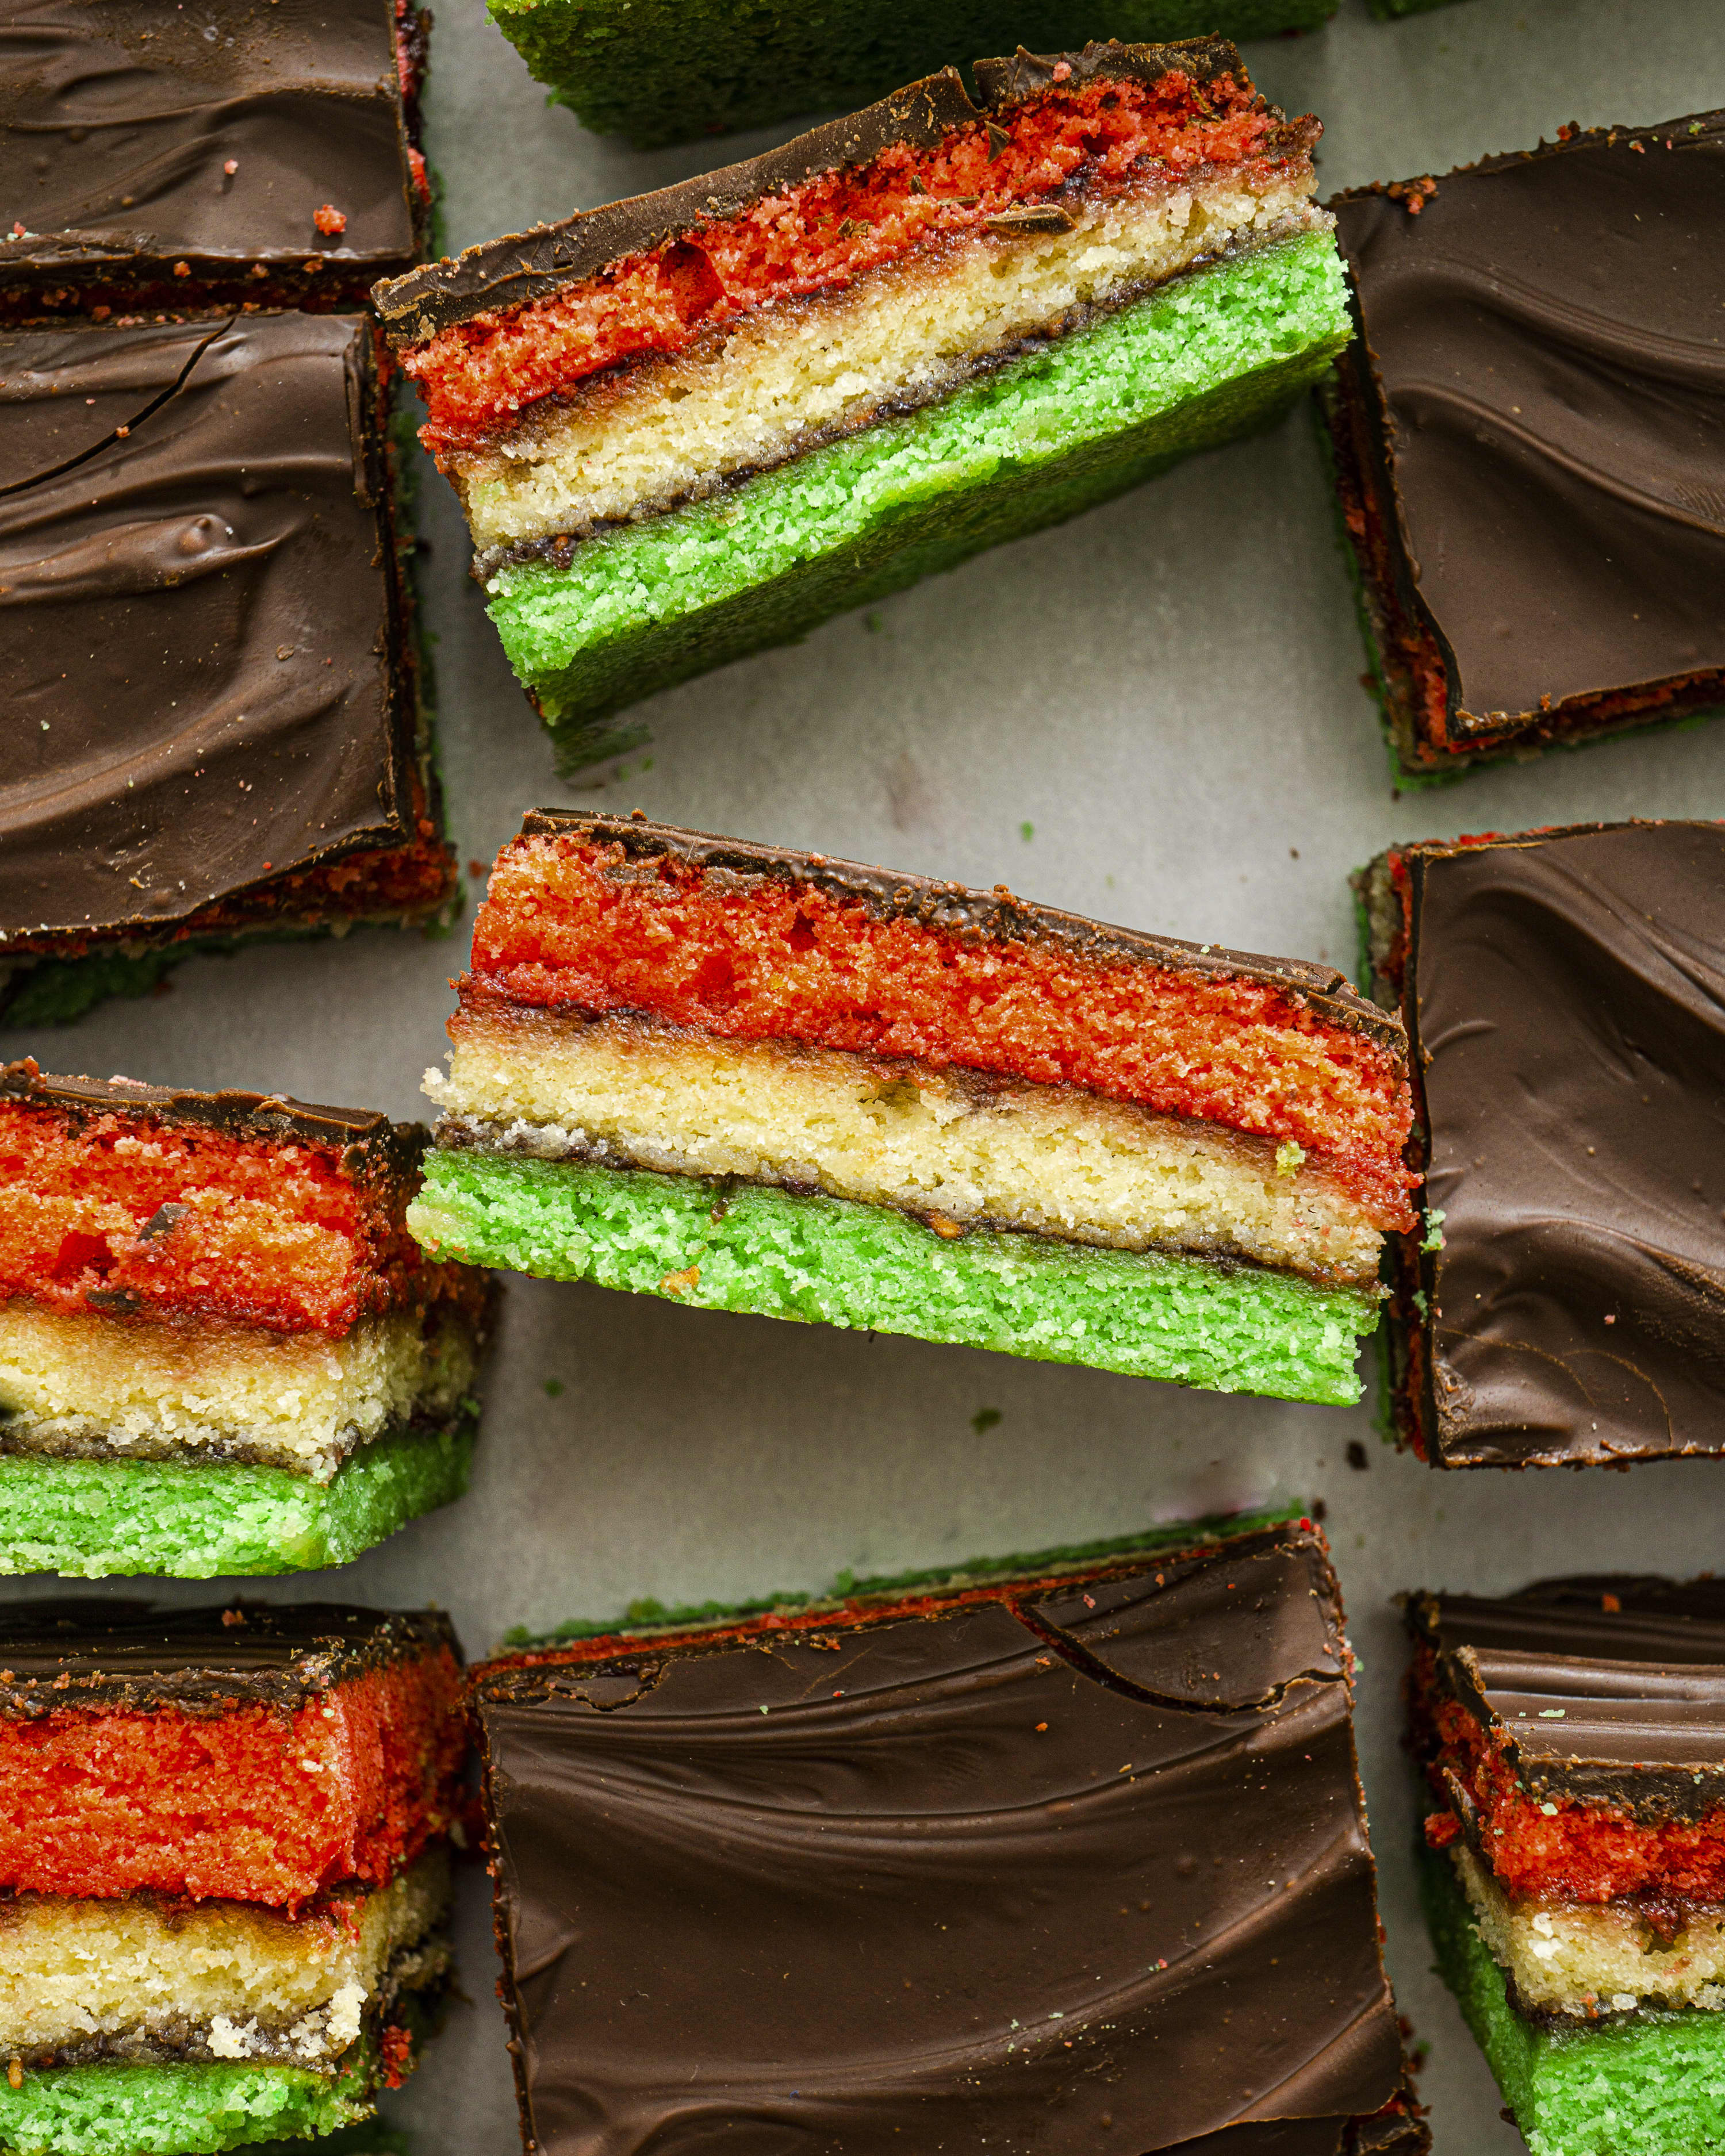 New York Bakeries and Restaurants Are Making Better Rainbow Cookies - Eater  NY